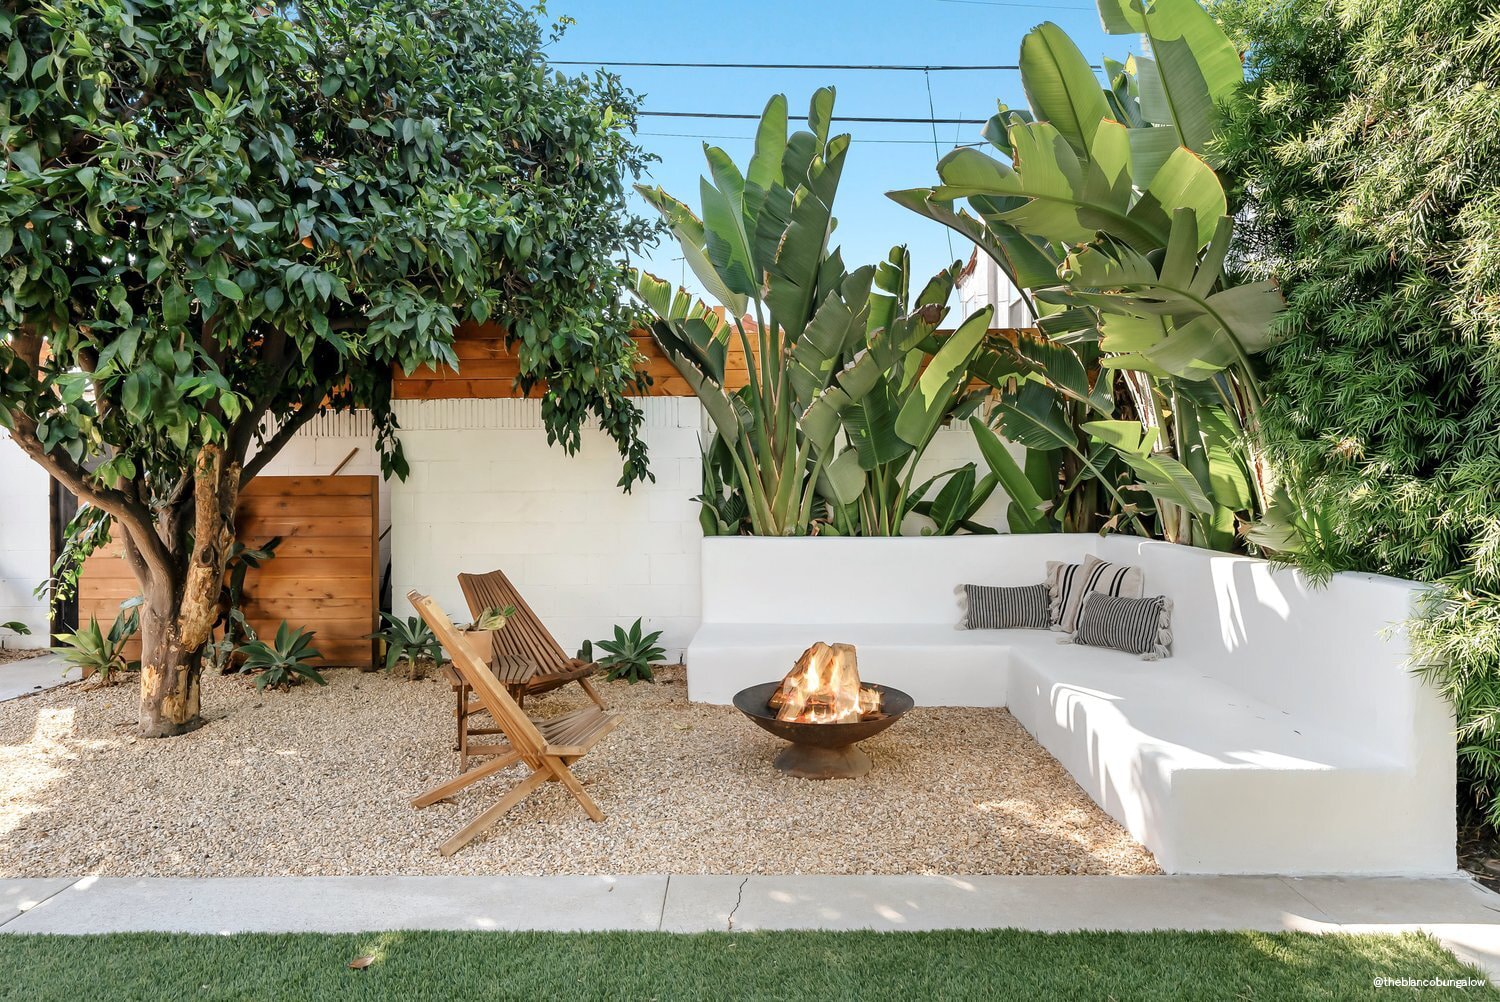 pea gravel patio with built-in bench seating, lounge chairs, and metal fire pit with tropical plantings in background